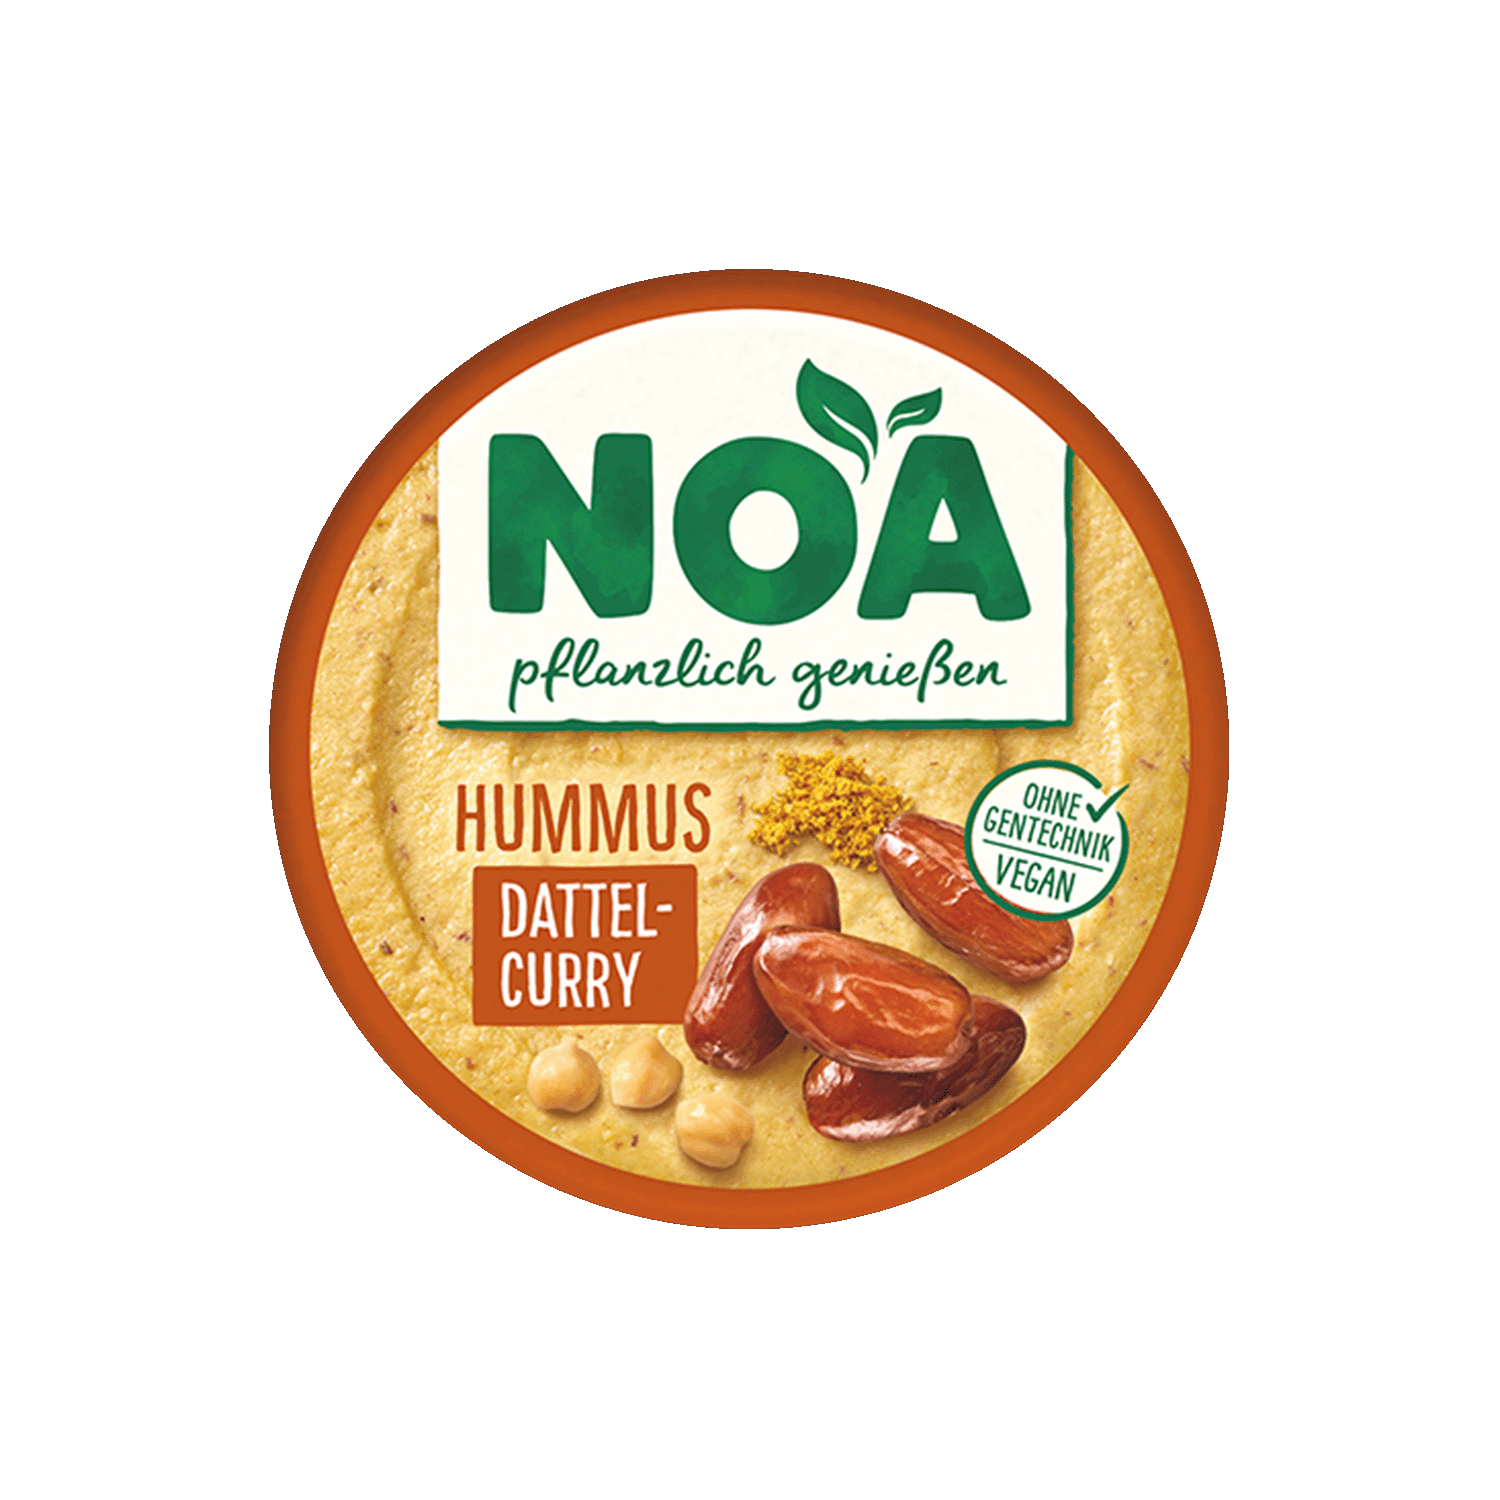 Hummus Date Curry, 175g